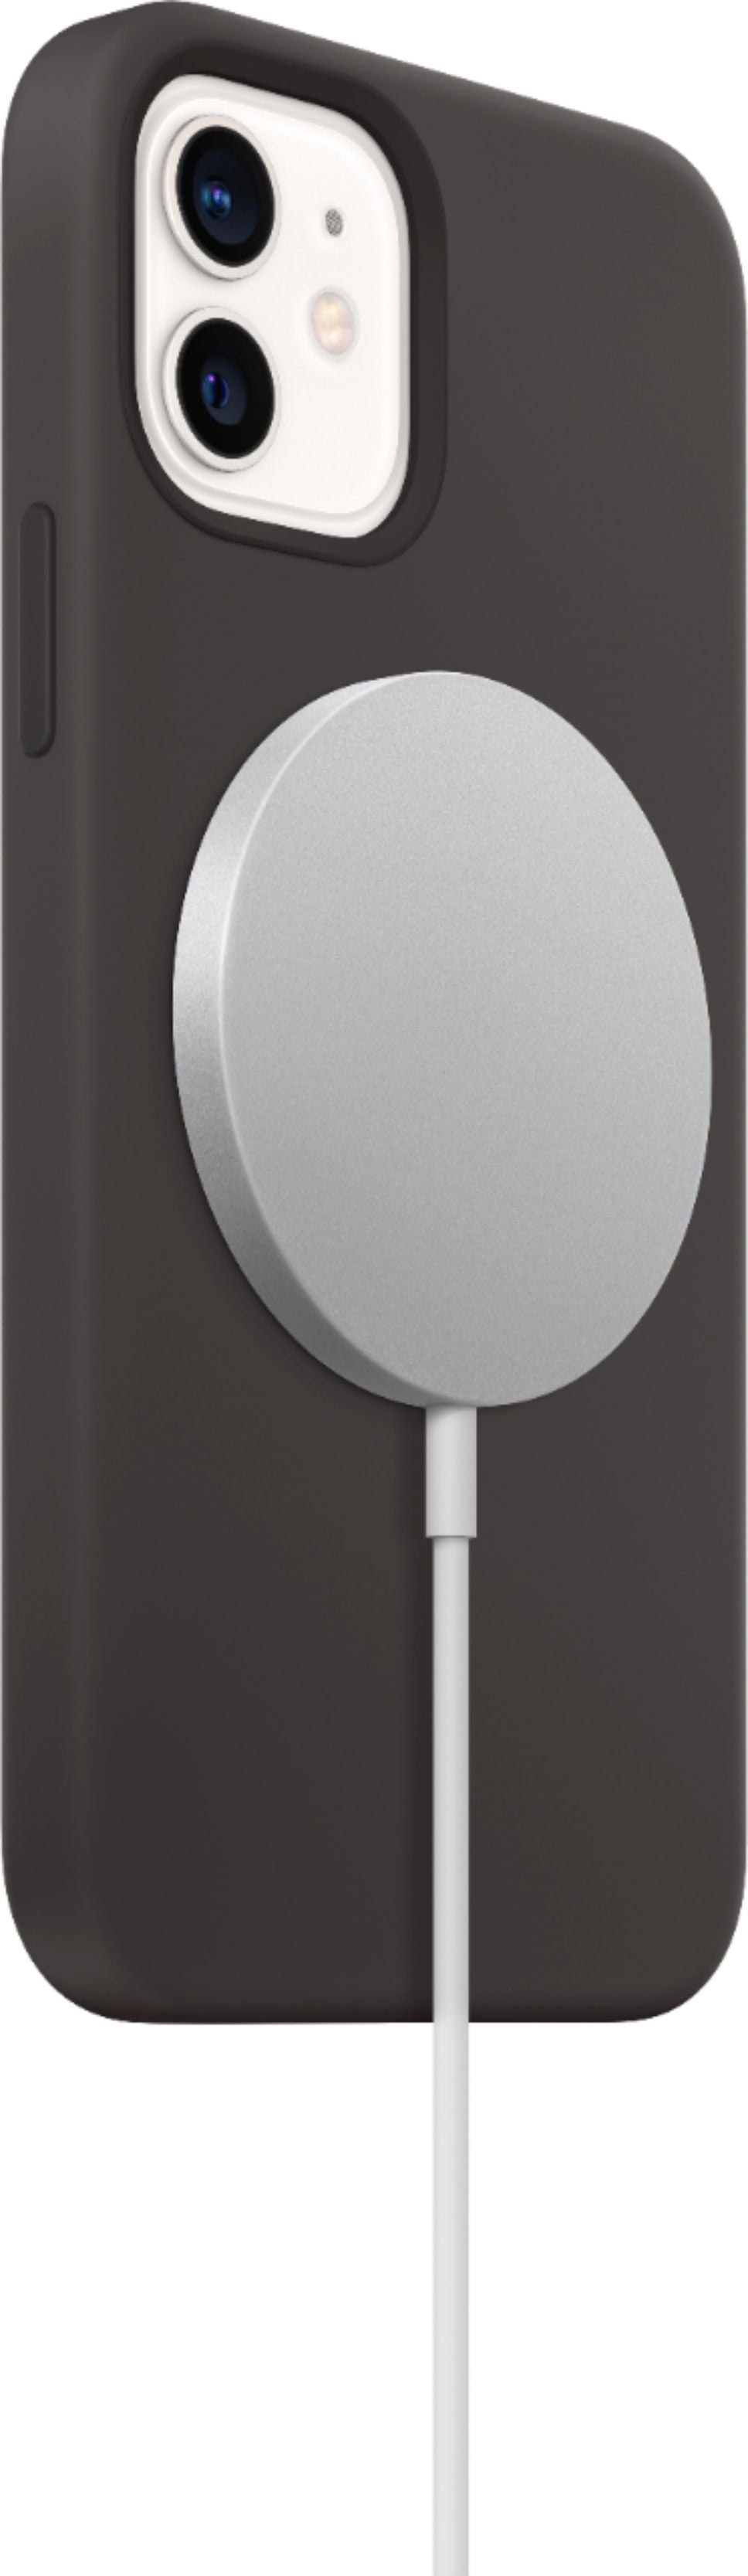 Apple MagSafe iPhone Wireless Charger - White